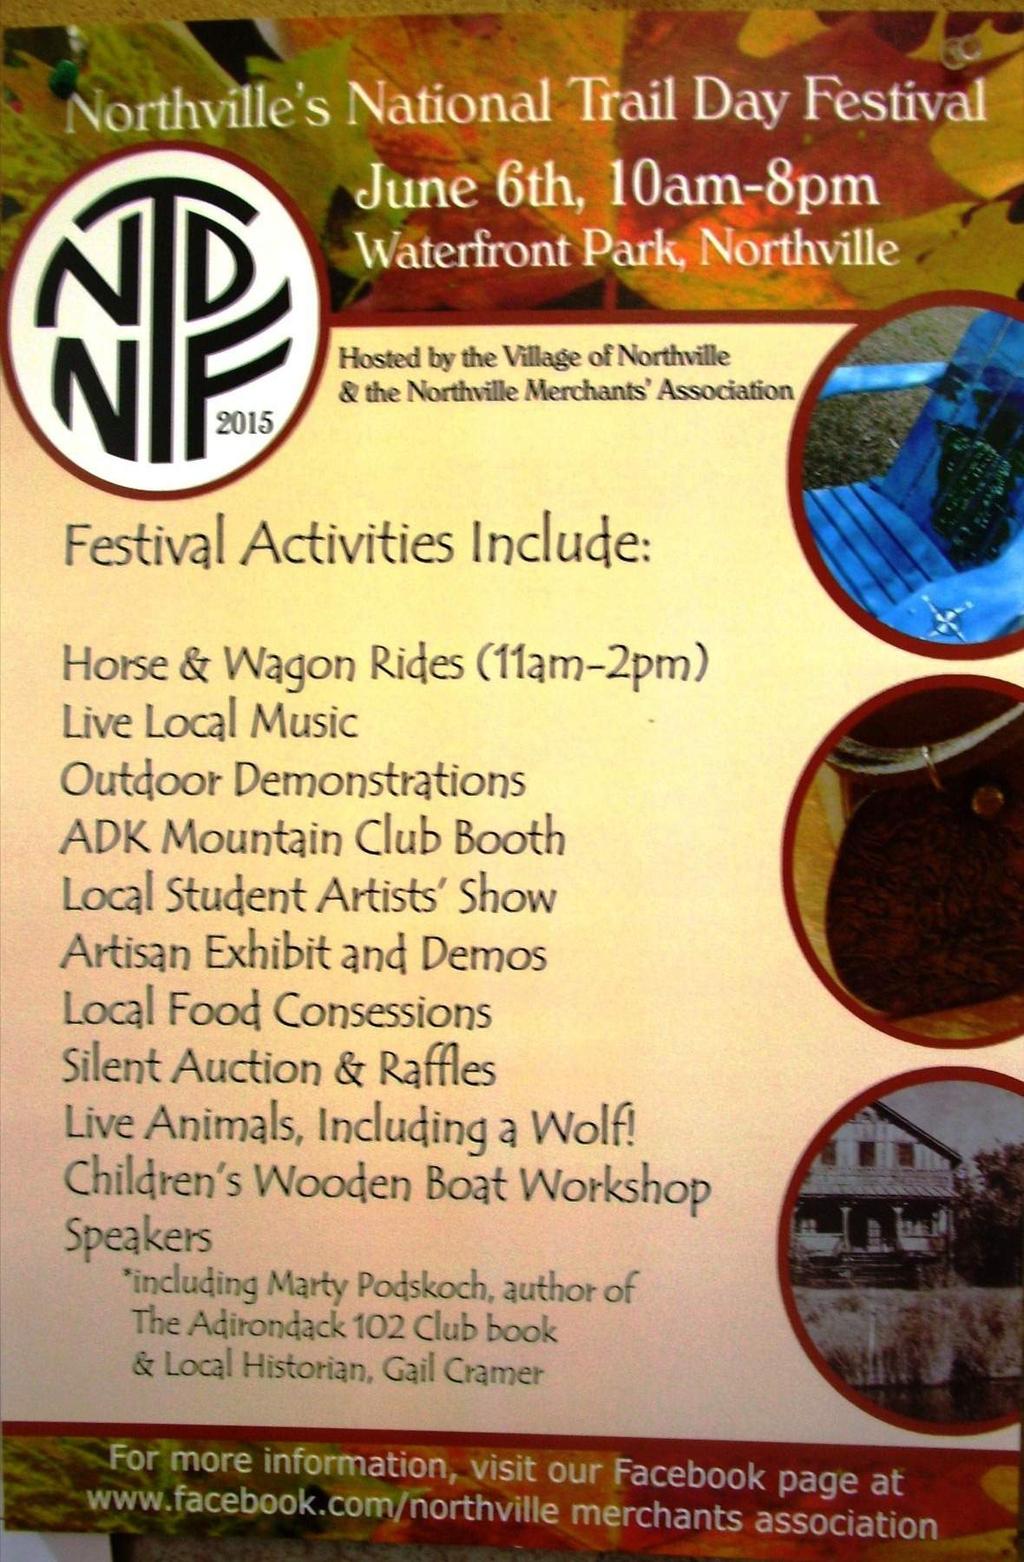 The NNHS Historical Museum will also be open.